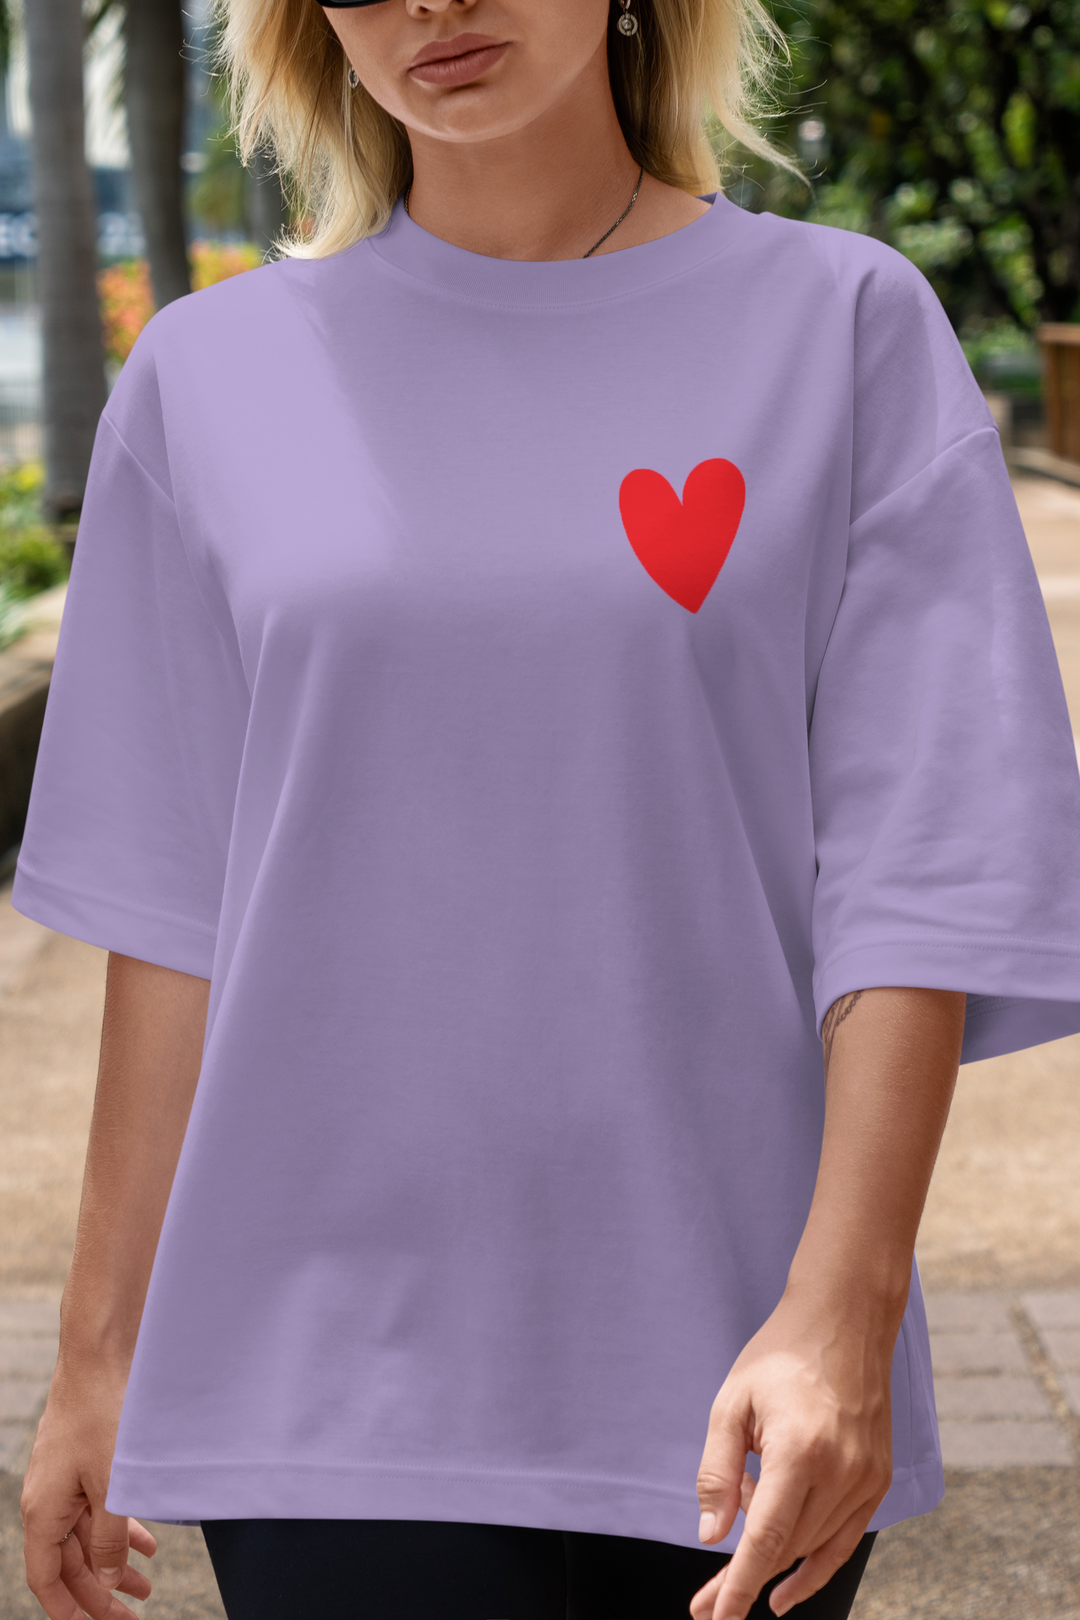 All You Need is Love Oversized T-shirt